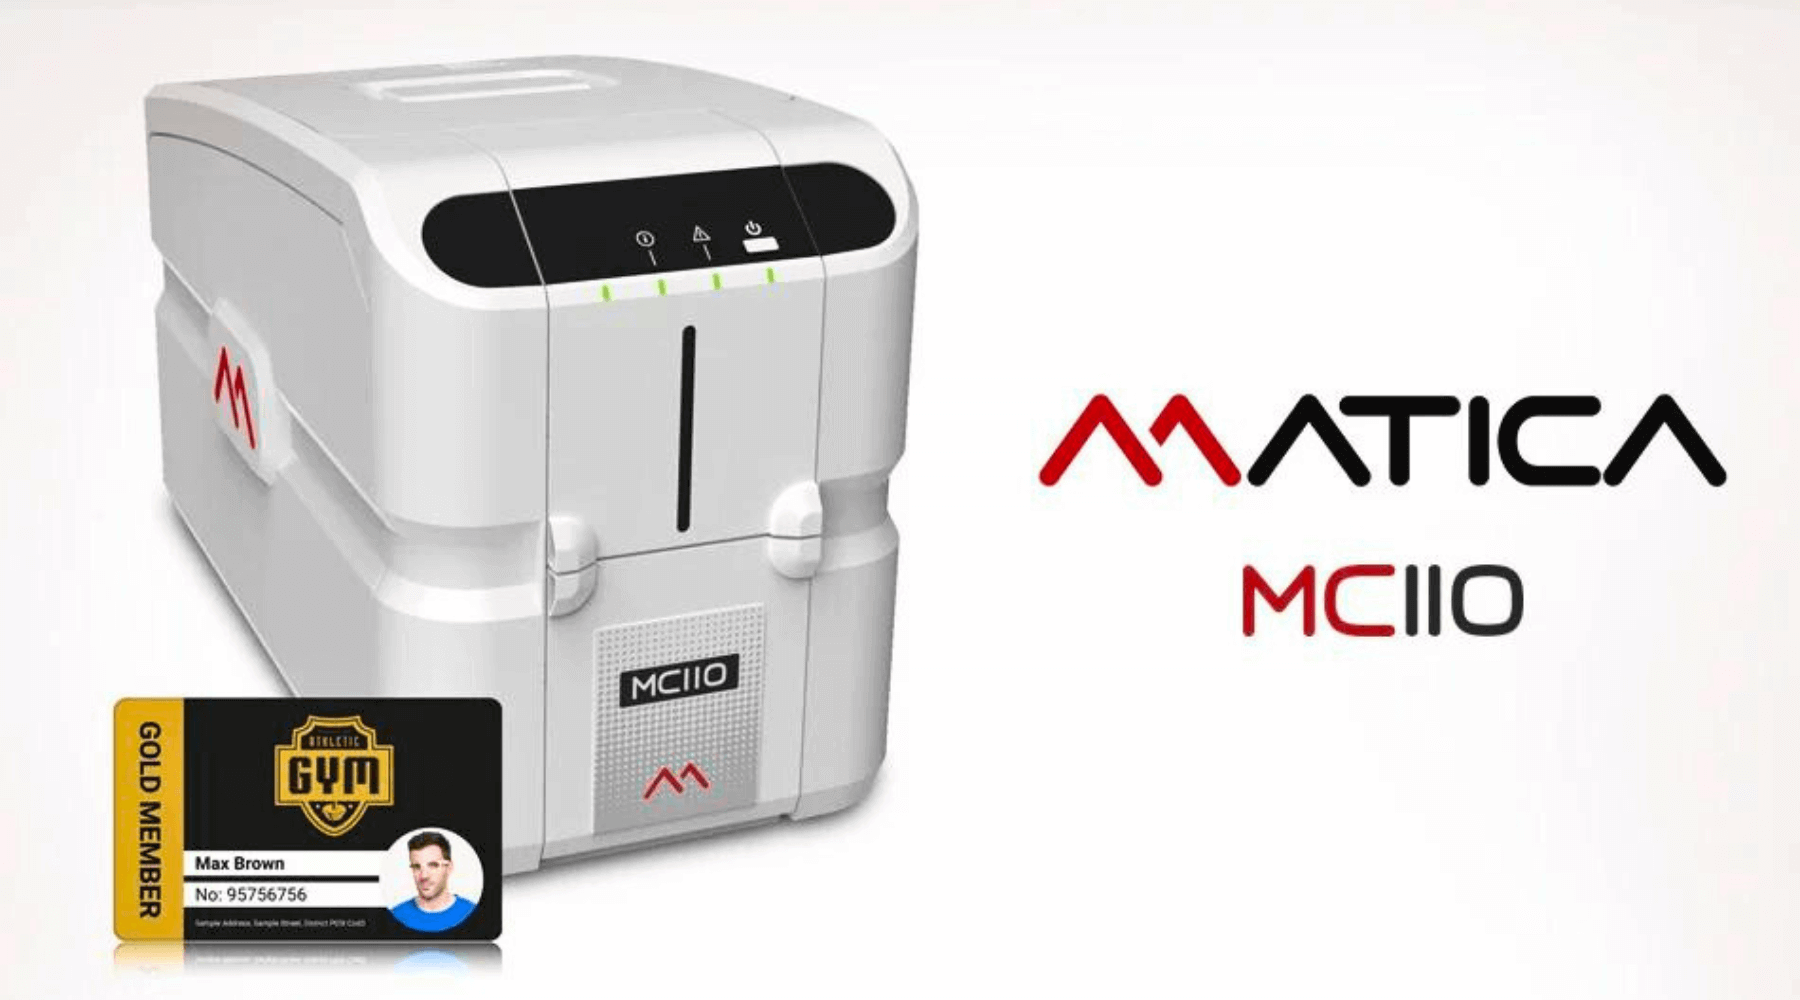 Matica MC110 - one of the best ID Card Printers for low volume users